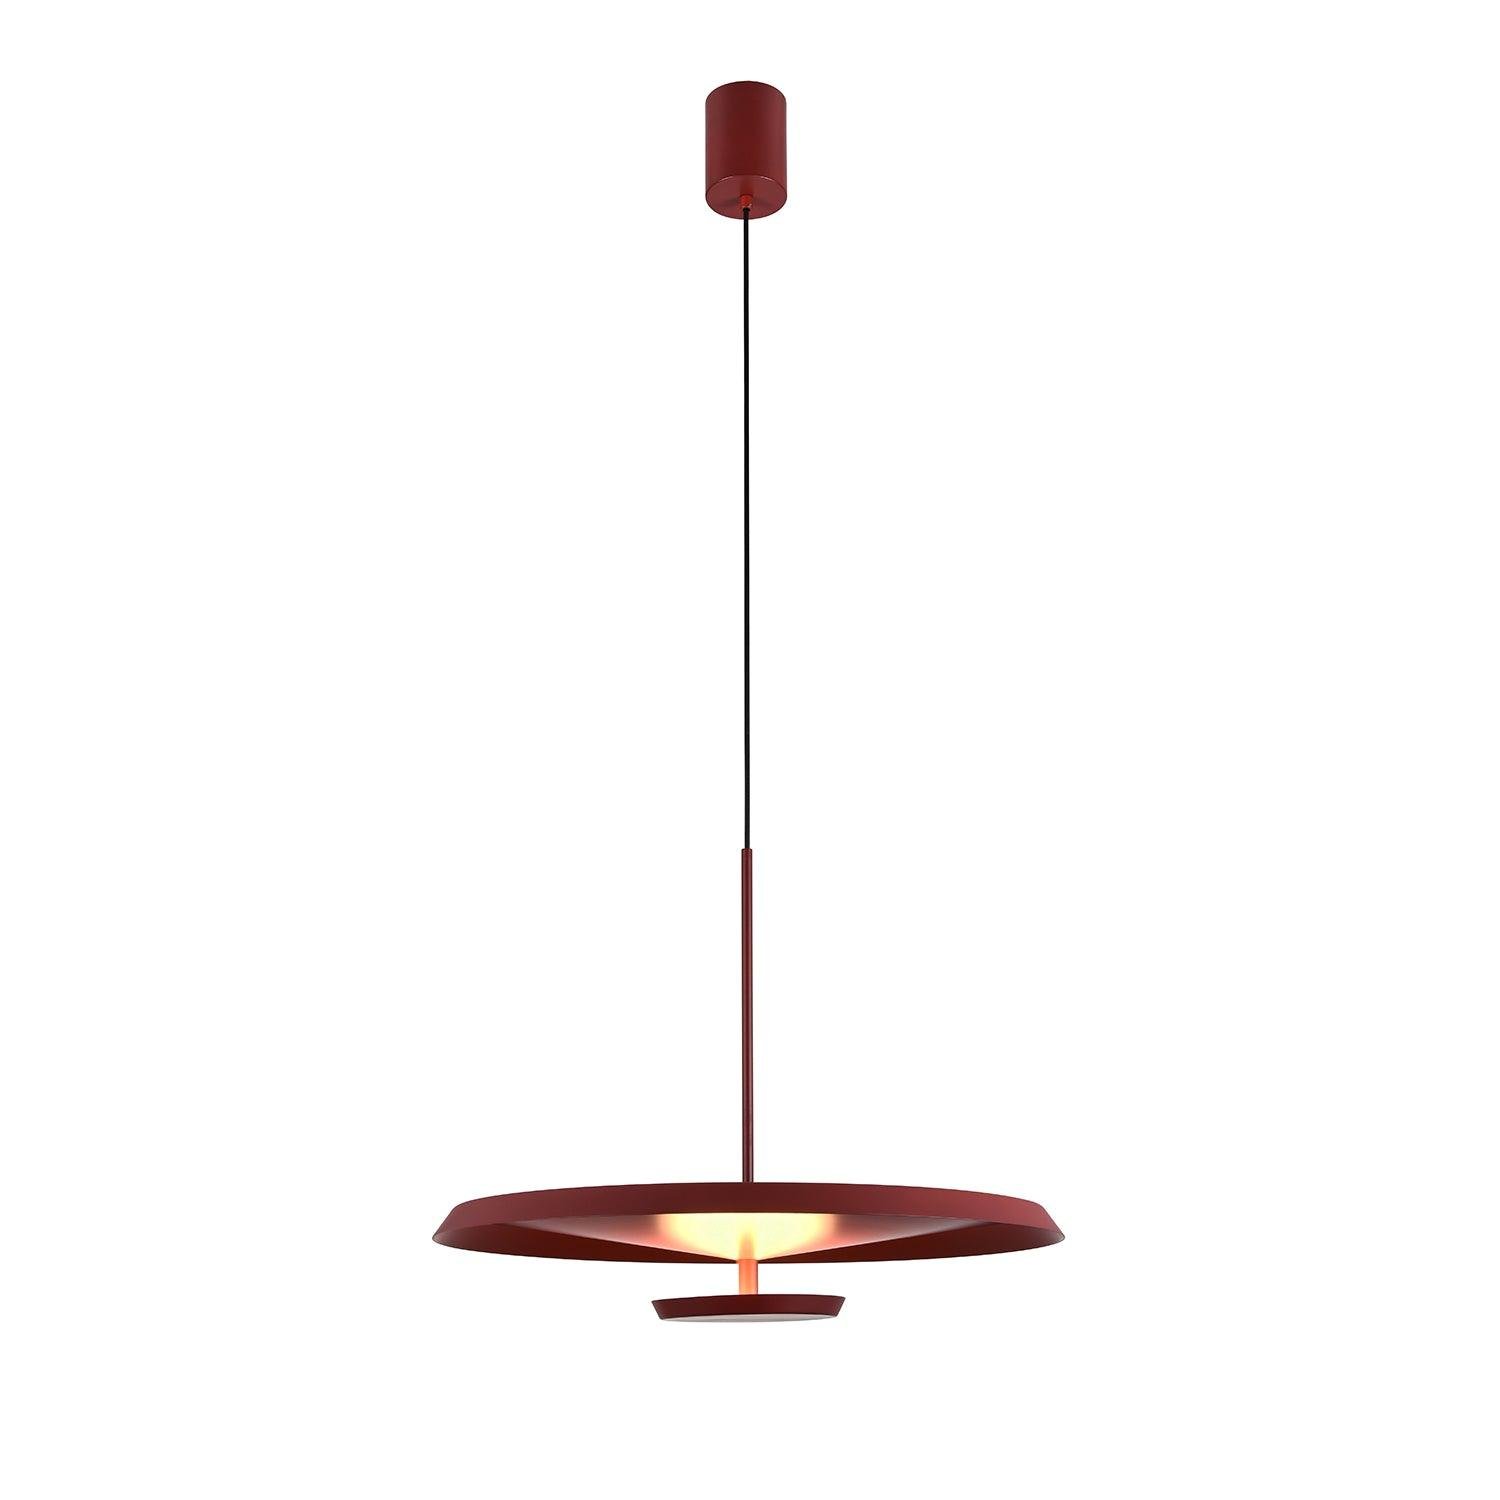 Dark Red Cool Light Flat Pendant Light with a diameter of 9.8 inches and a height of 10.4 inches (25cm x 26.5cm).